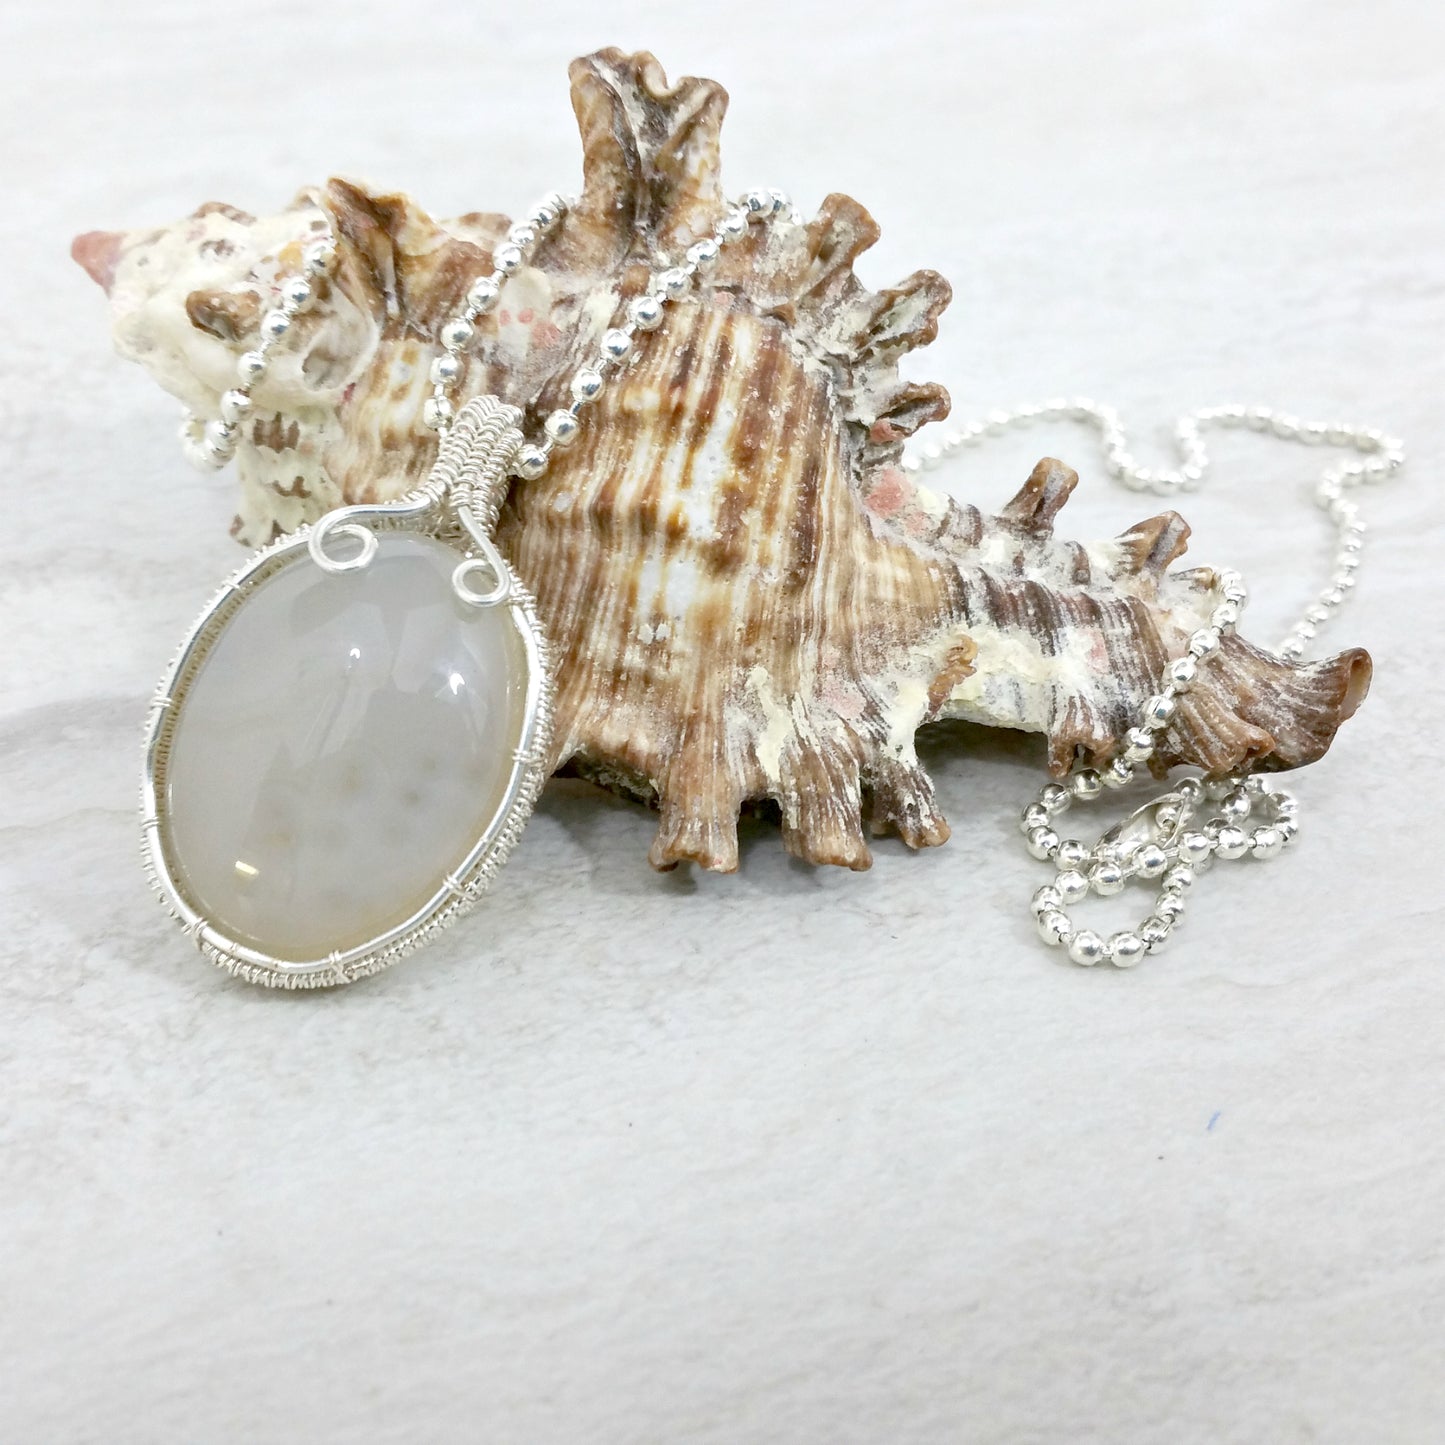 Wire Woven Agate Pendant Necklace, Jewelry for Women